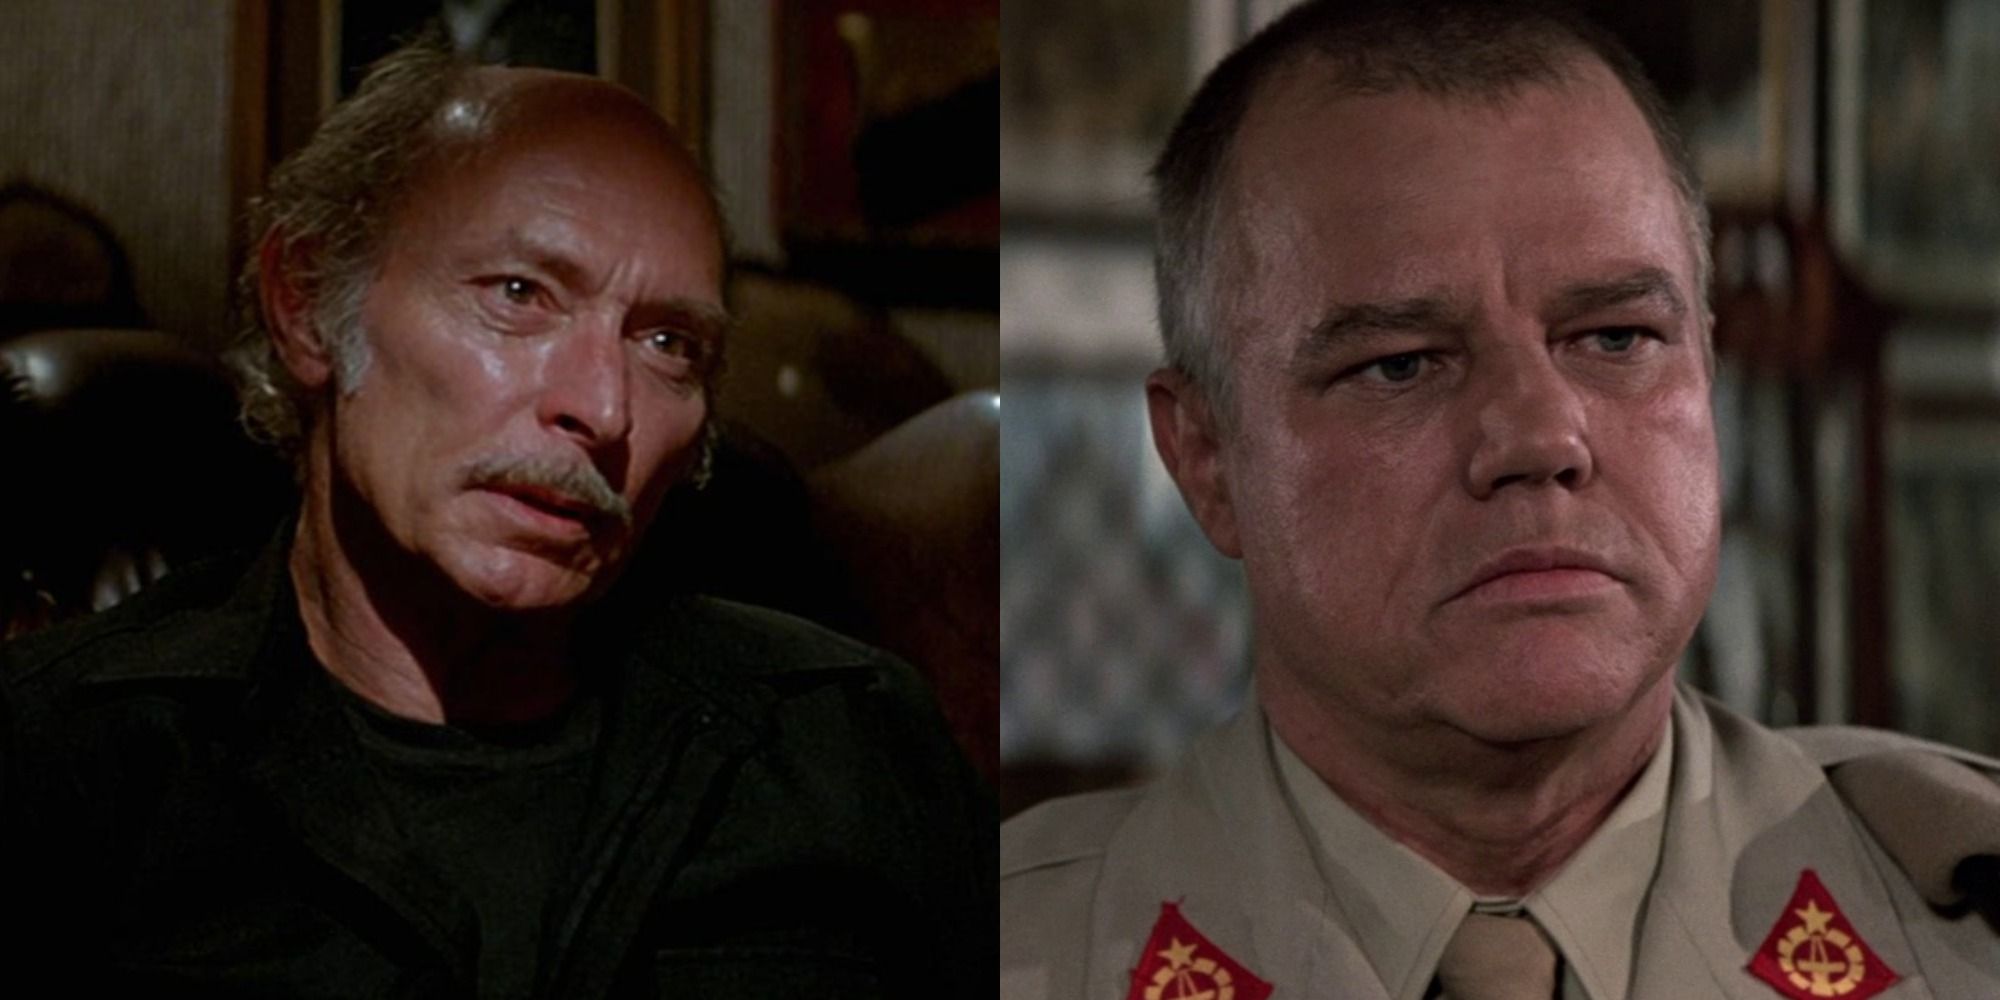 Split image of Lee Van Cleef in Escape from New York and Joe Don Baker in The Living Daylights